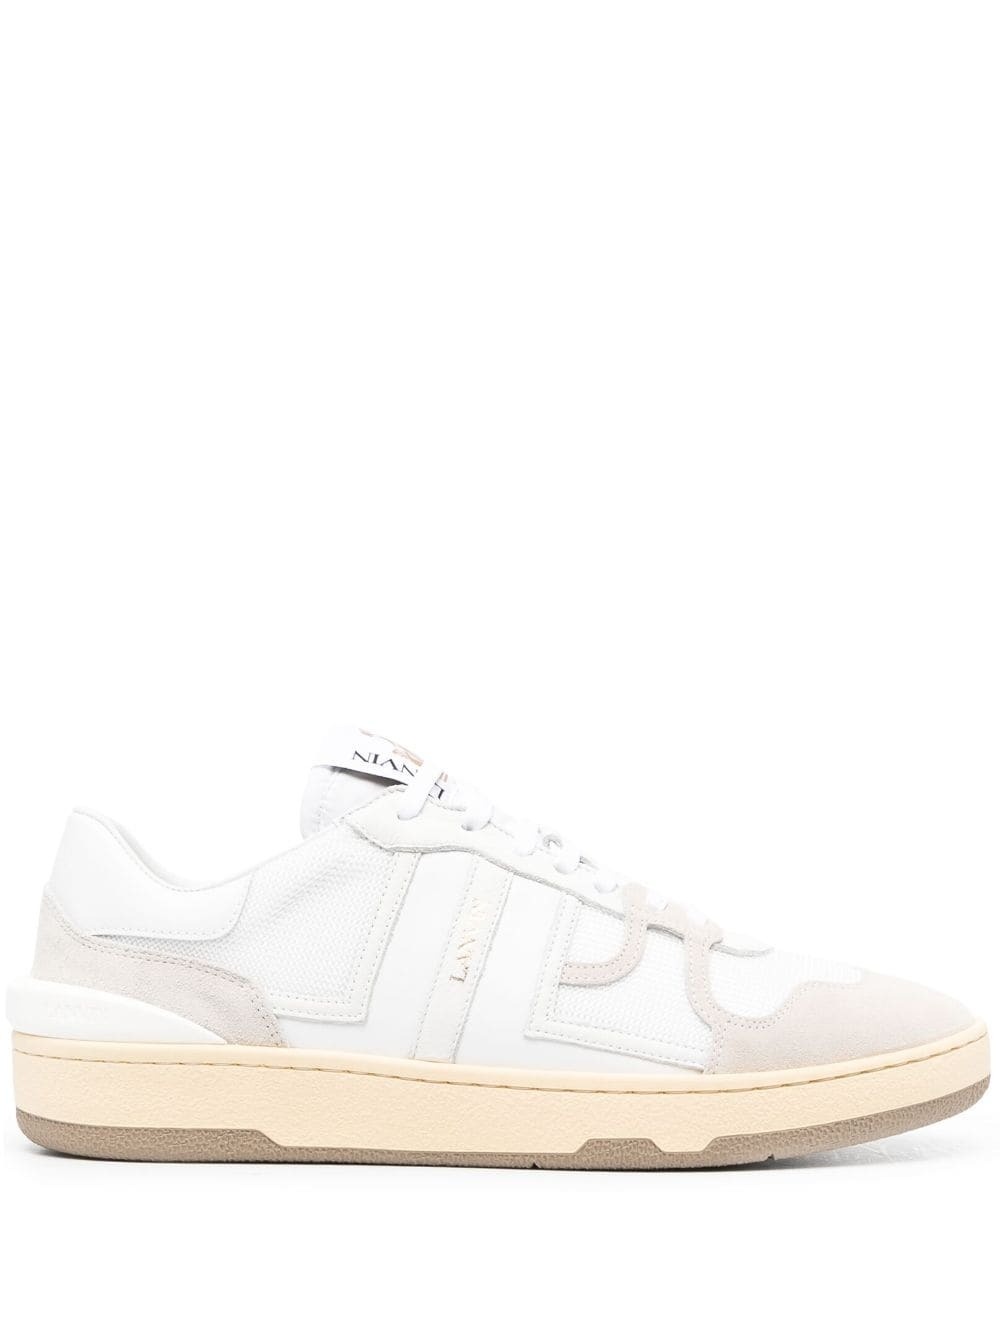 Photo: LANVIN - Clay Low-top Sneakers